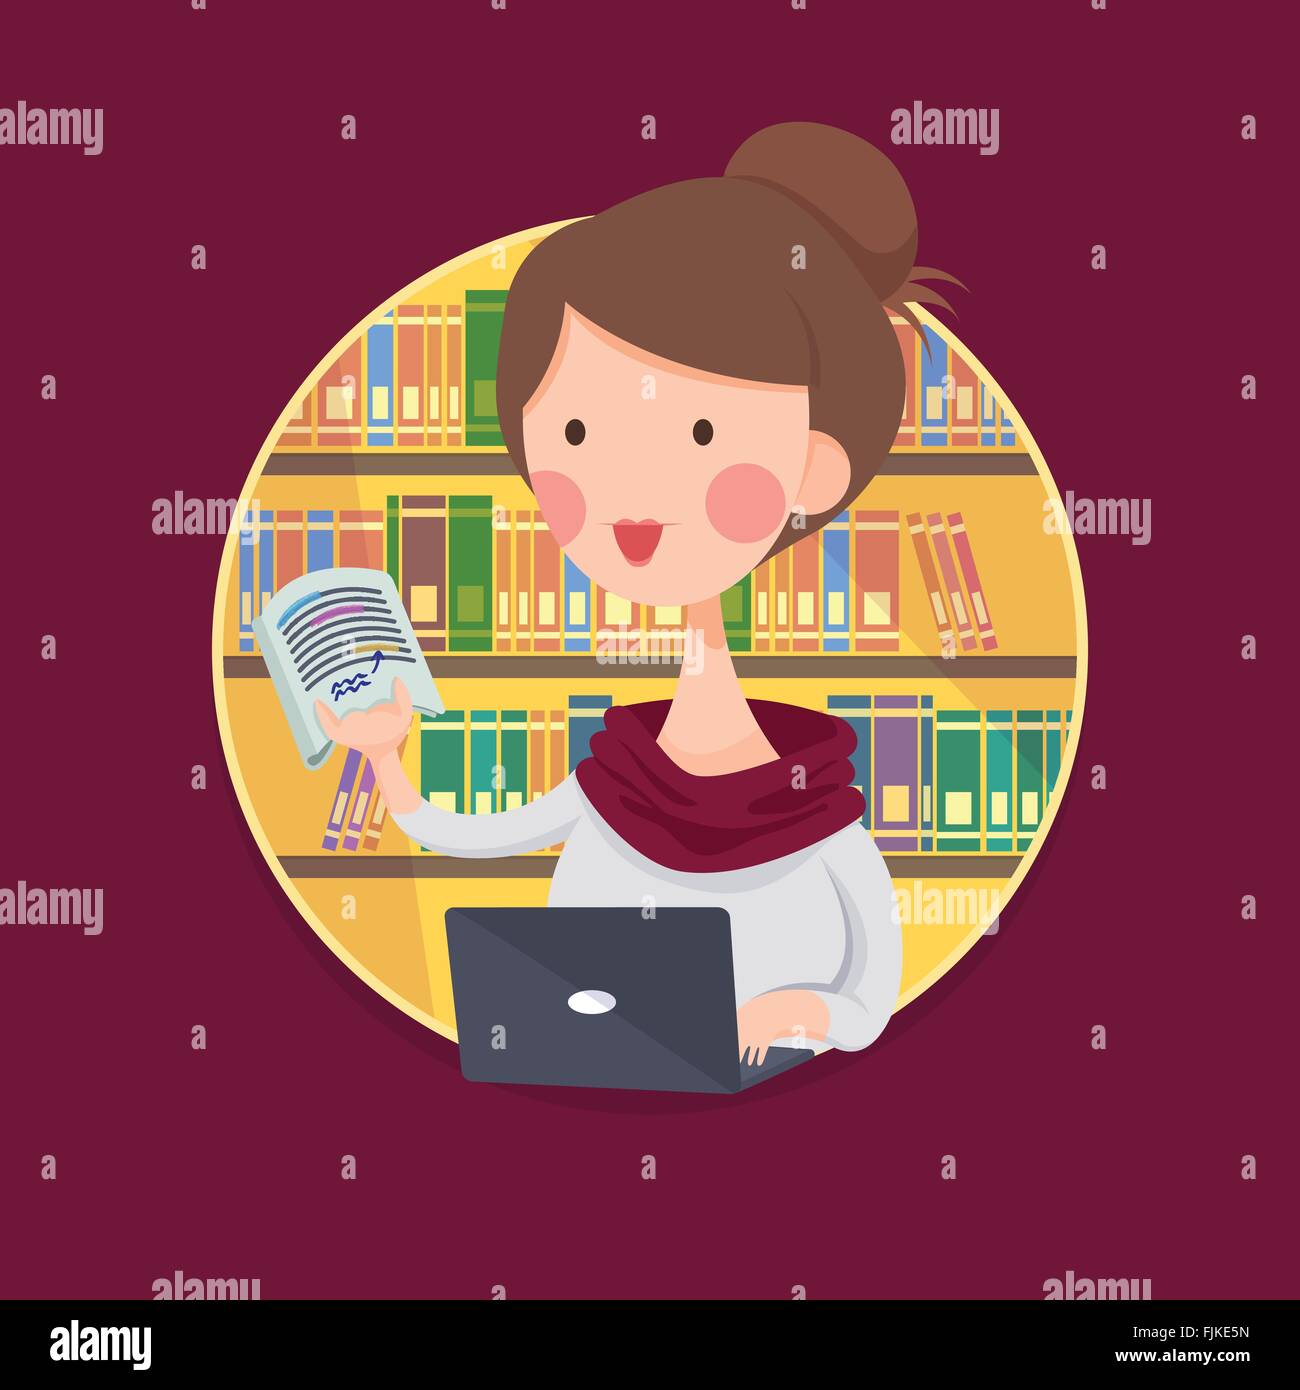 Vector Illustration of a College Girl Student Studying in Library, personnage Illustration de Vecteur